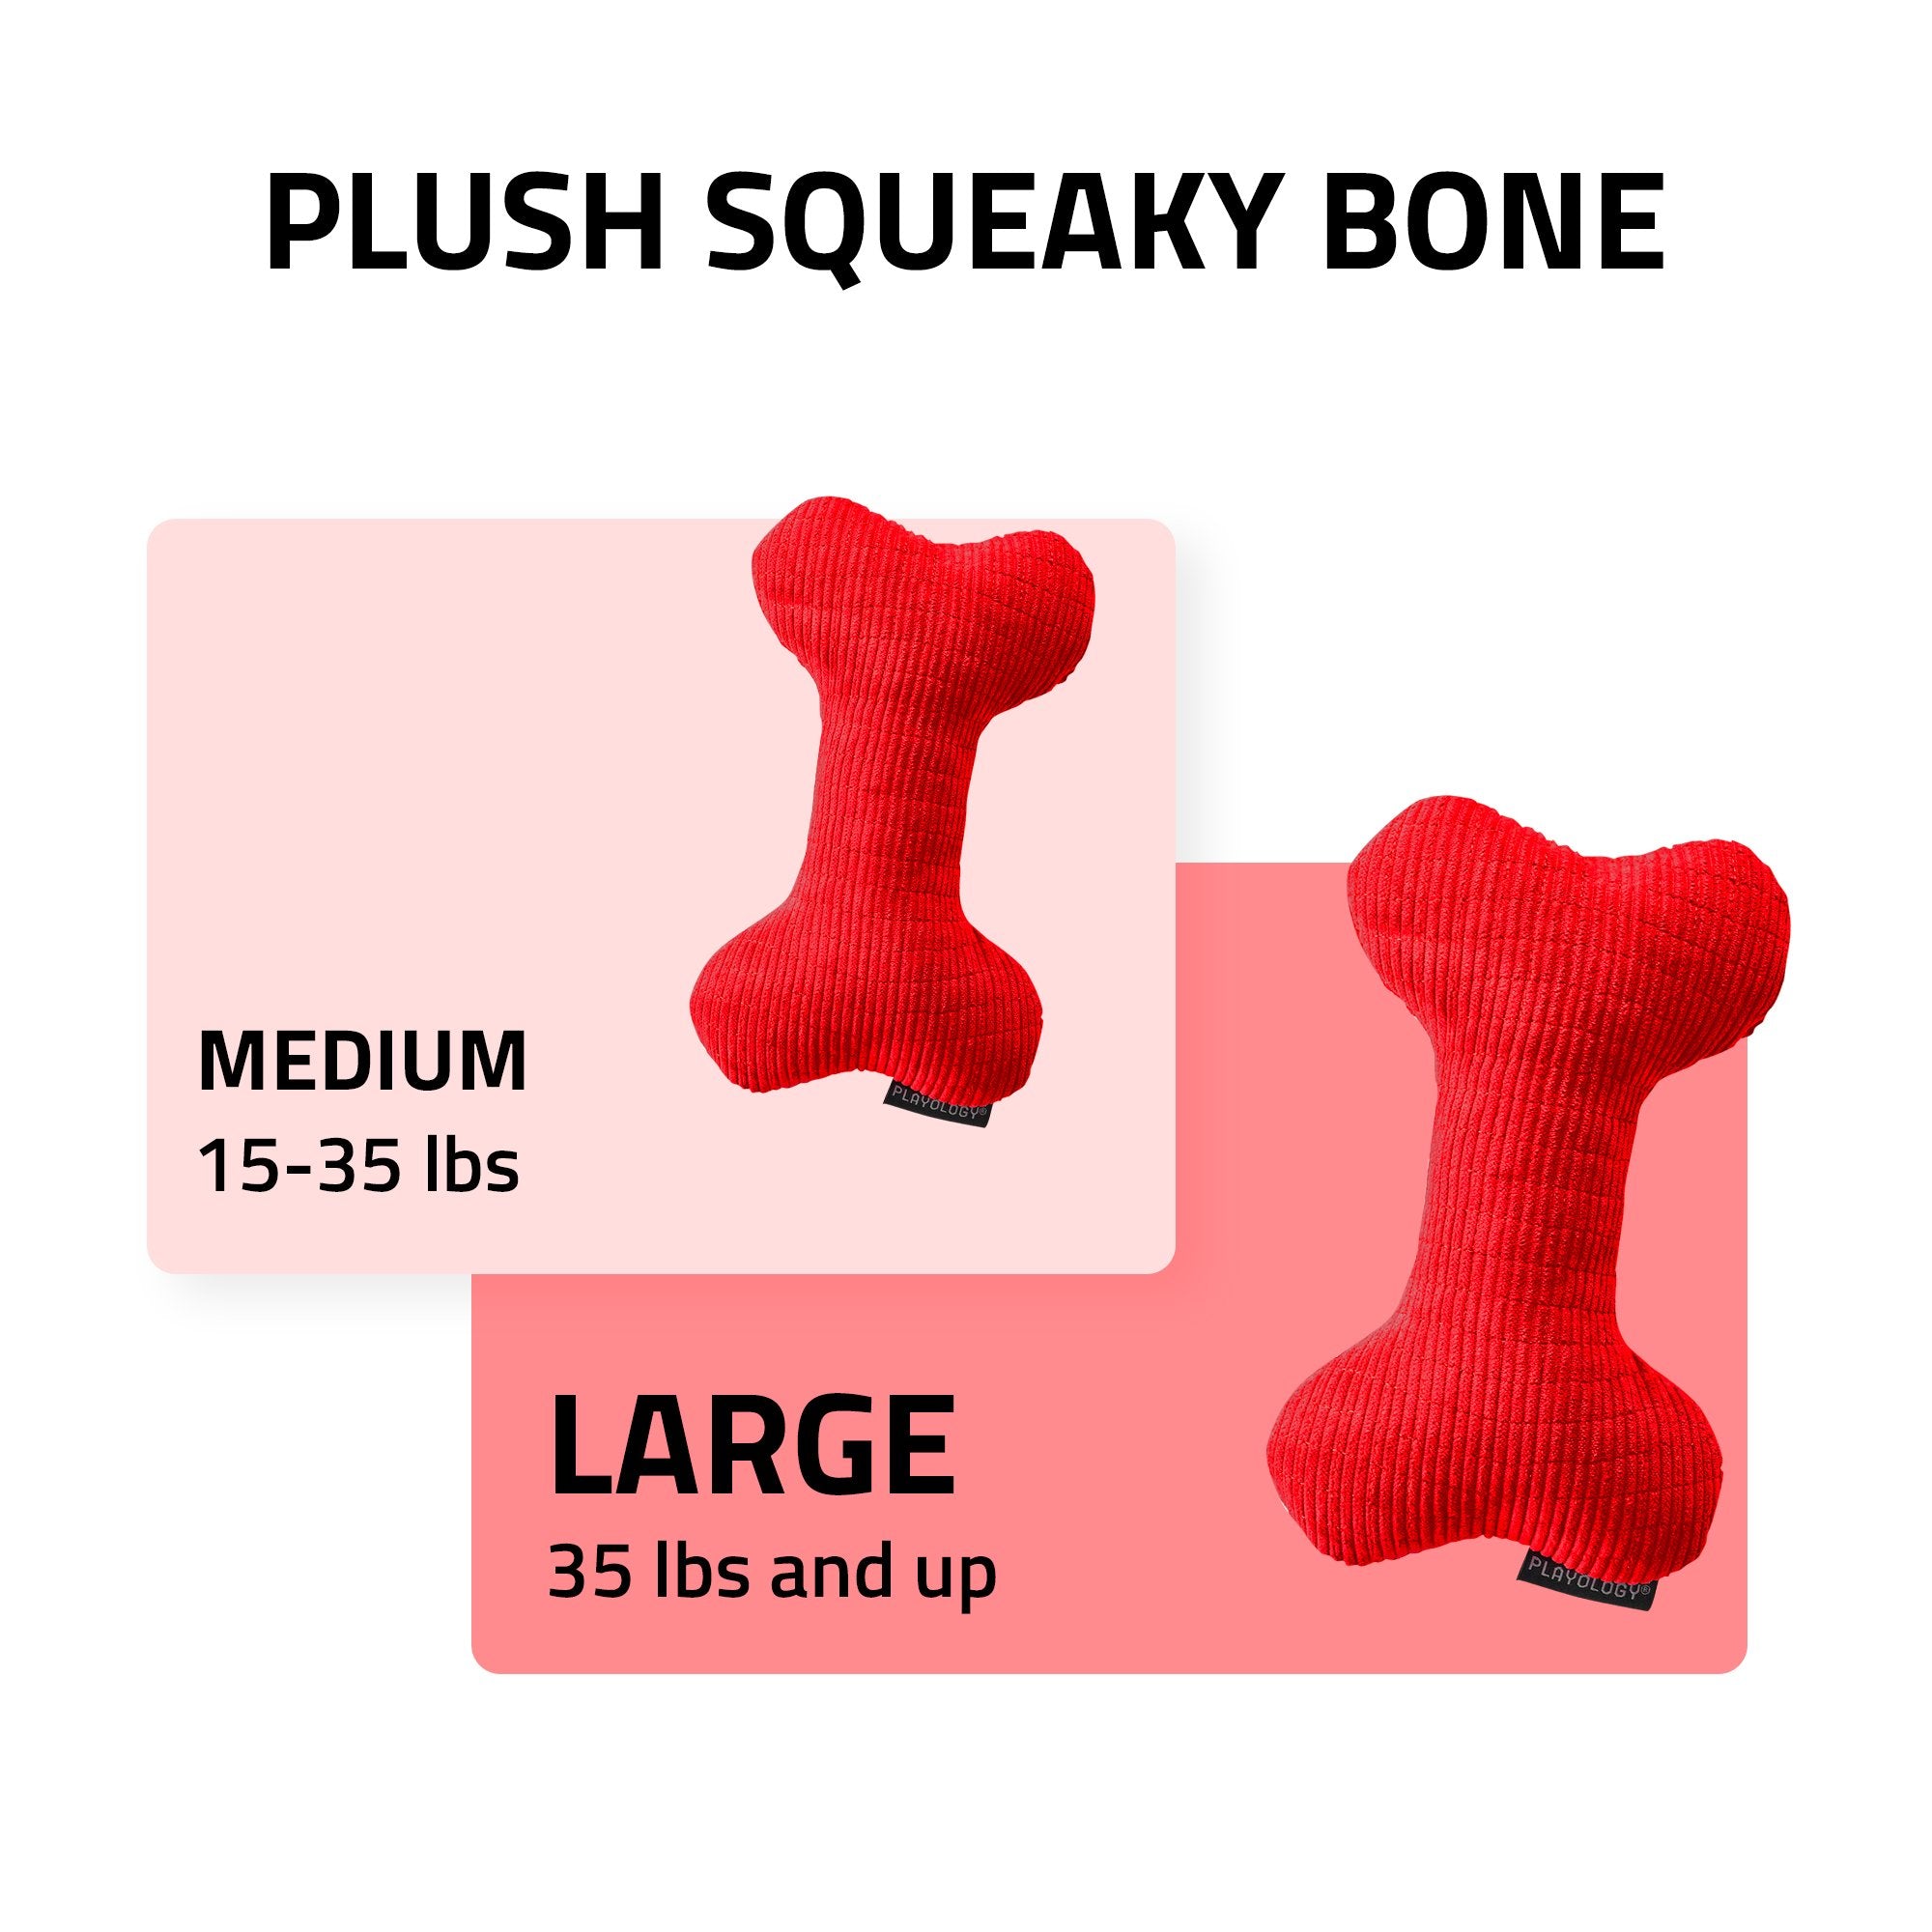 Playology Plush Squeaky Bone Dog Toy Beef - Mutts & Co.